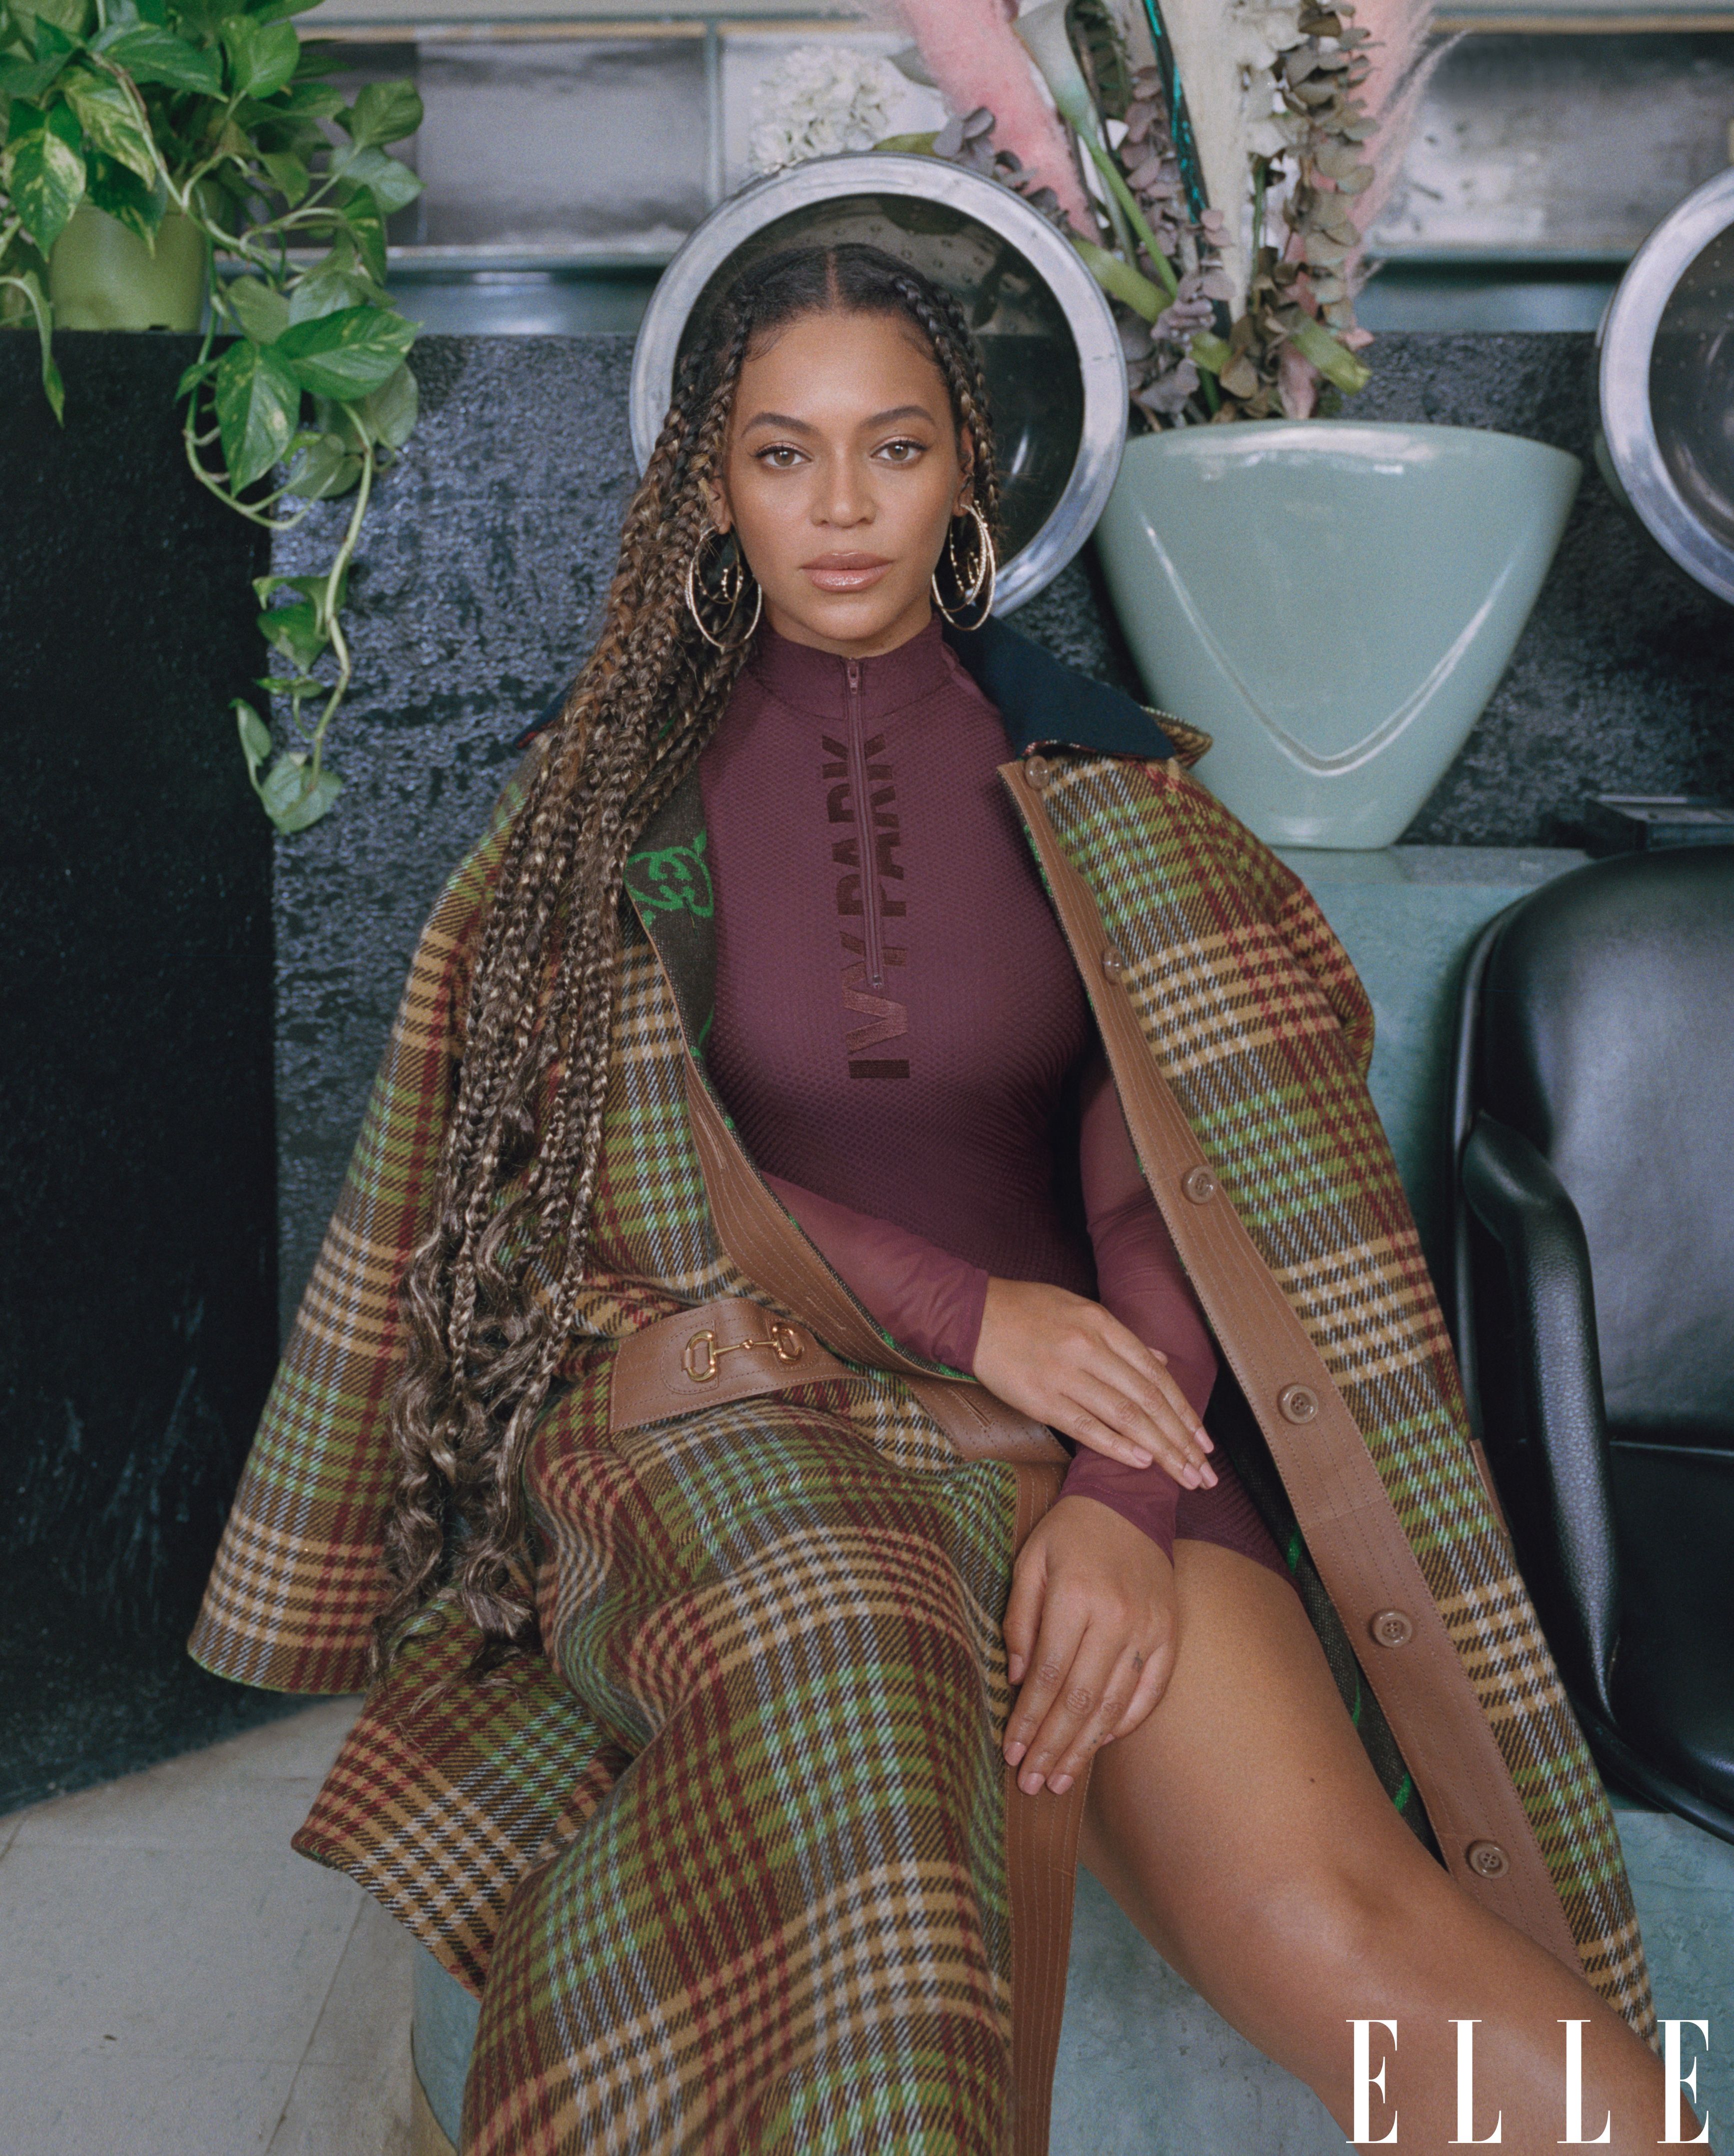 Beyoncé on Motherhood, Self-Care, and Her Quest For Purpose - Beyoncé  launches IVY PARK x adidas